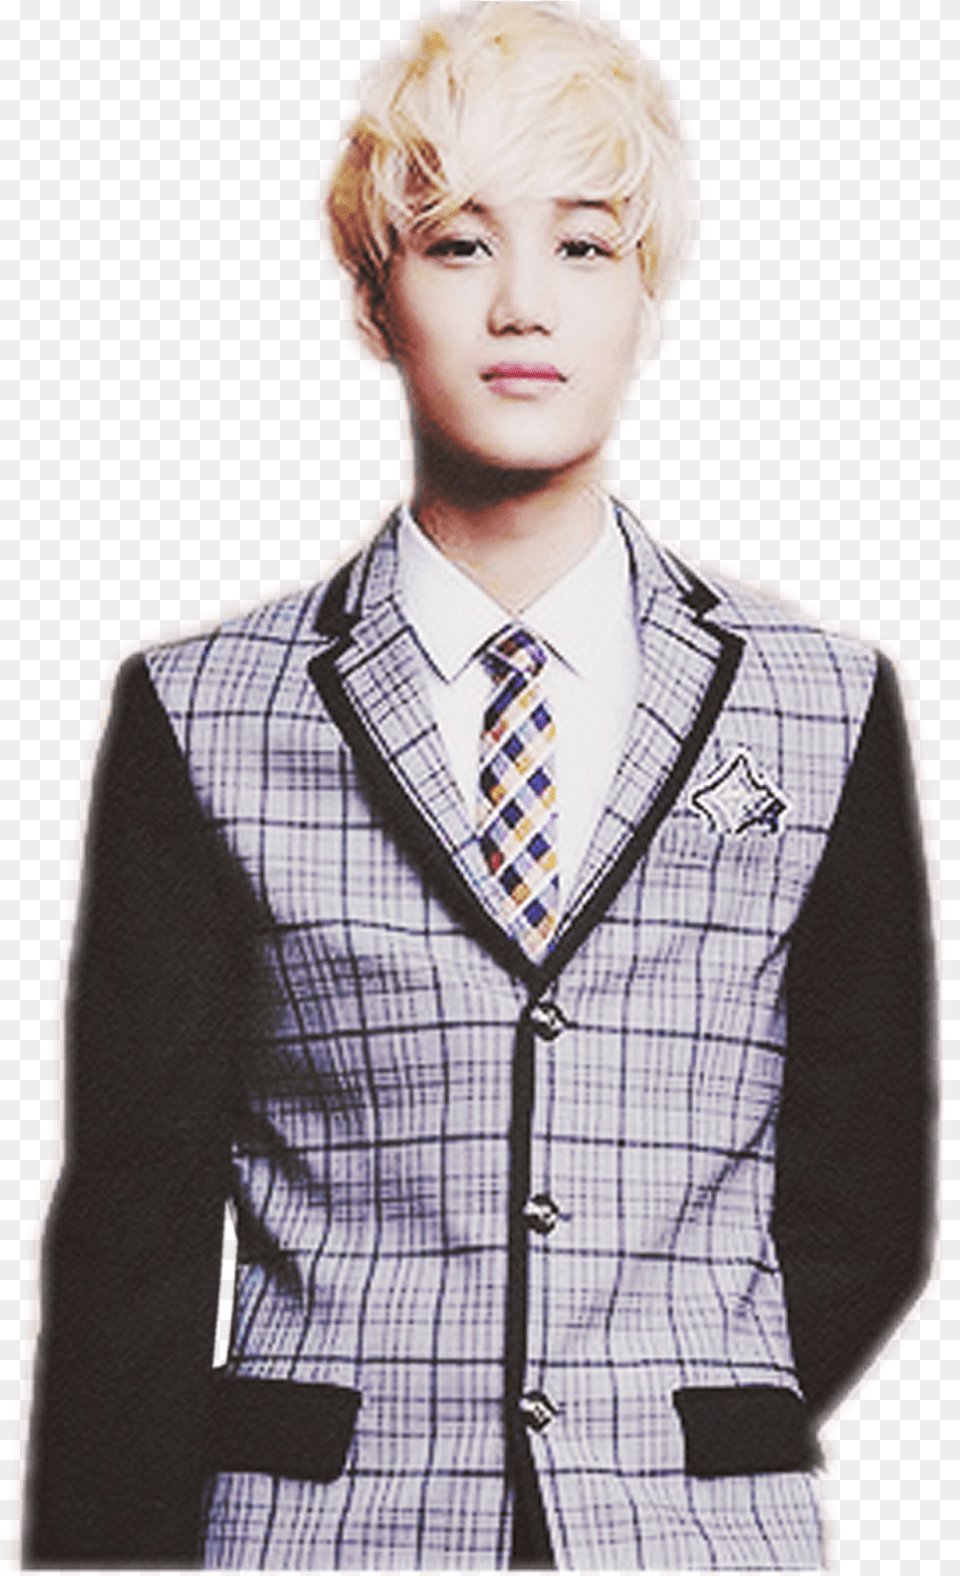 Do Not Claim These As Yours Kai Exo Kai, Accessories, Tie, Suit, Shirt Png Image